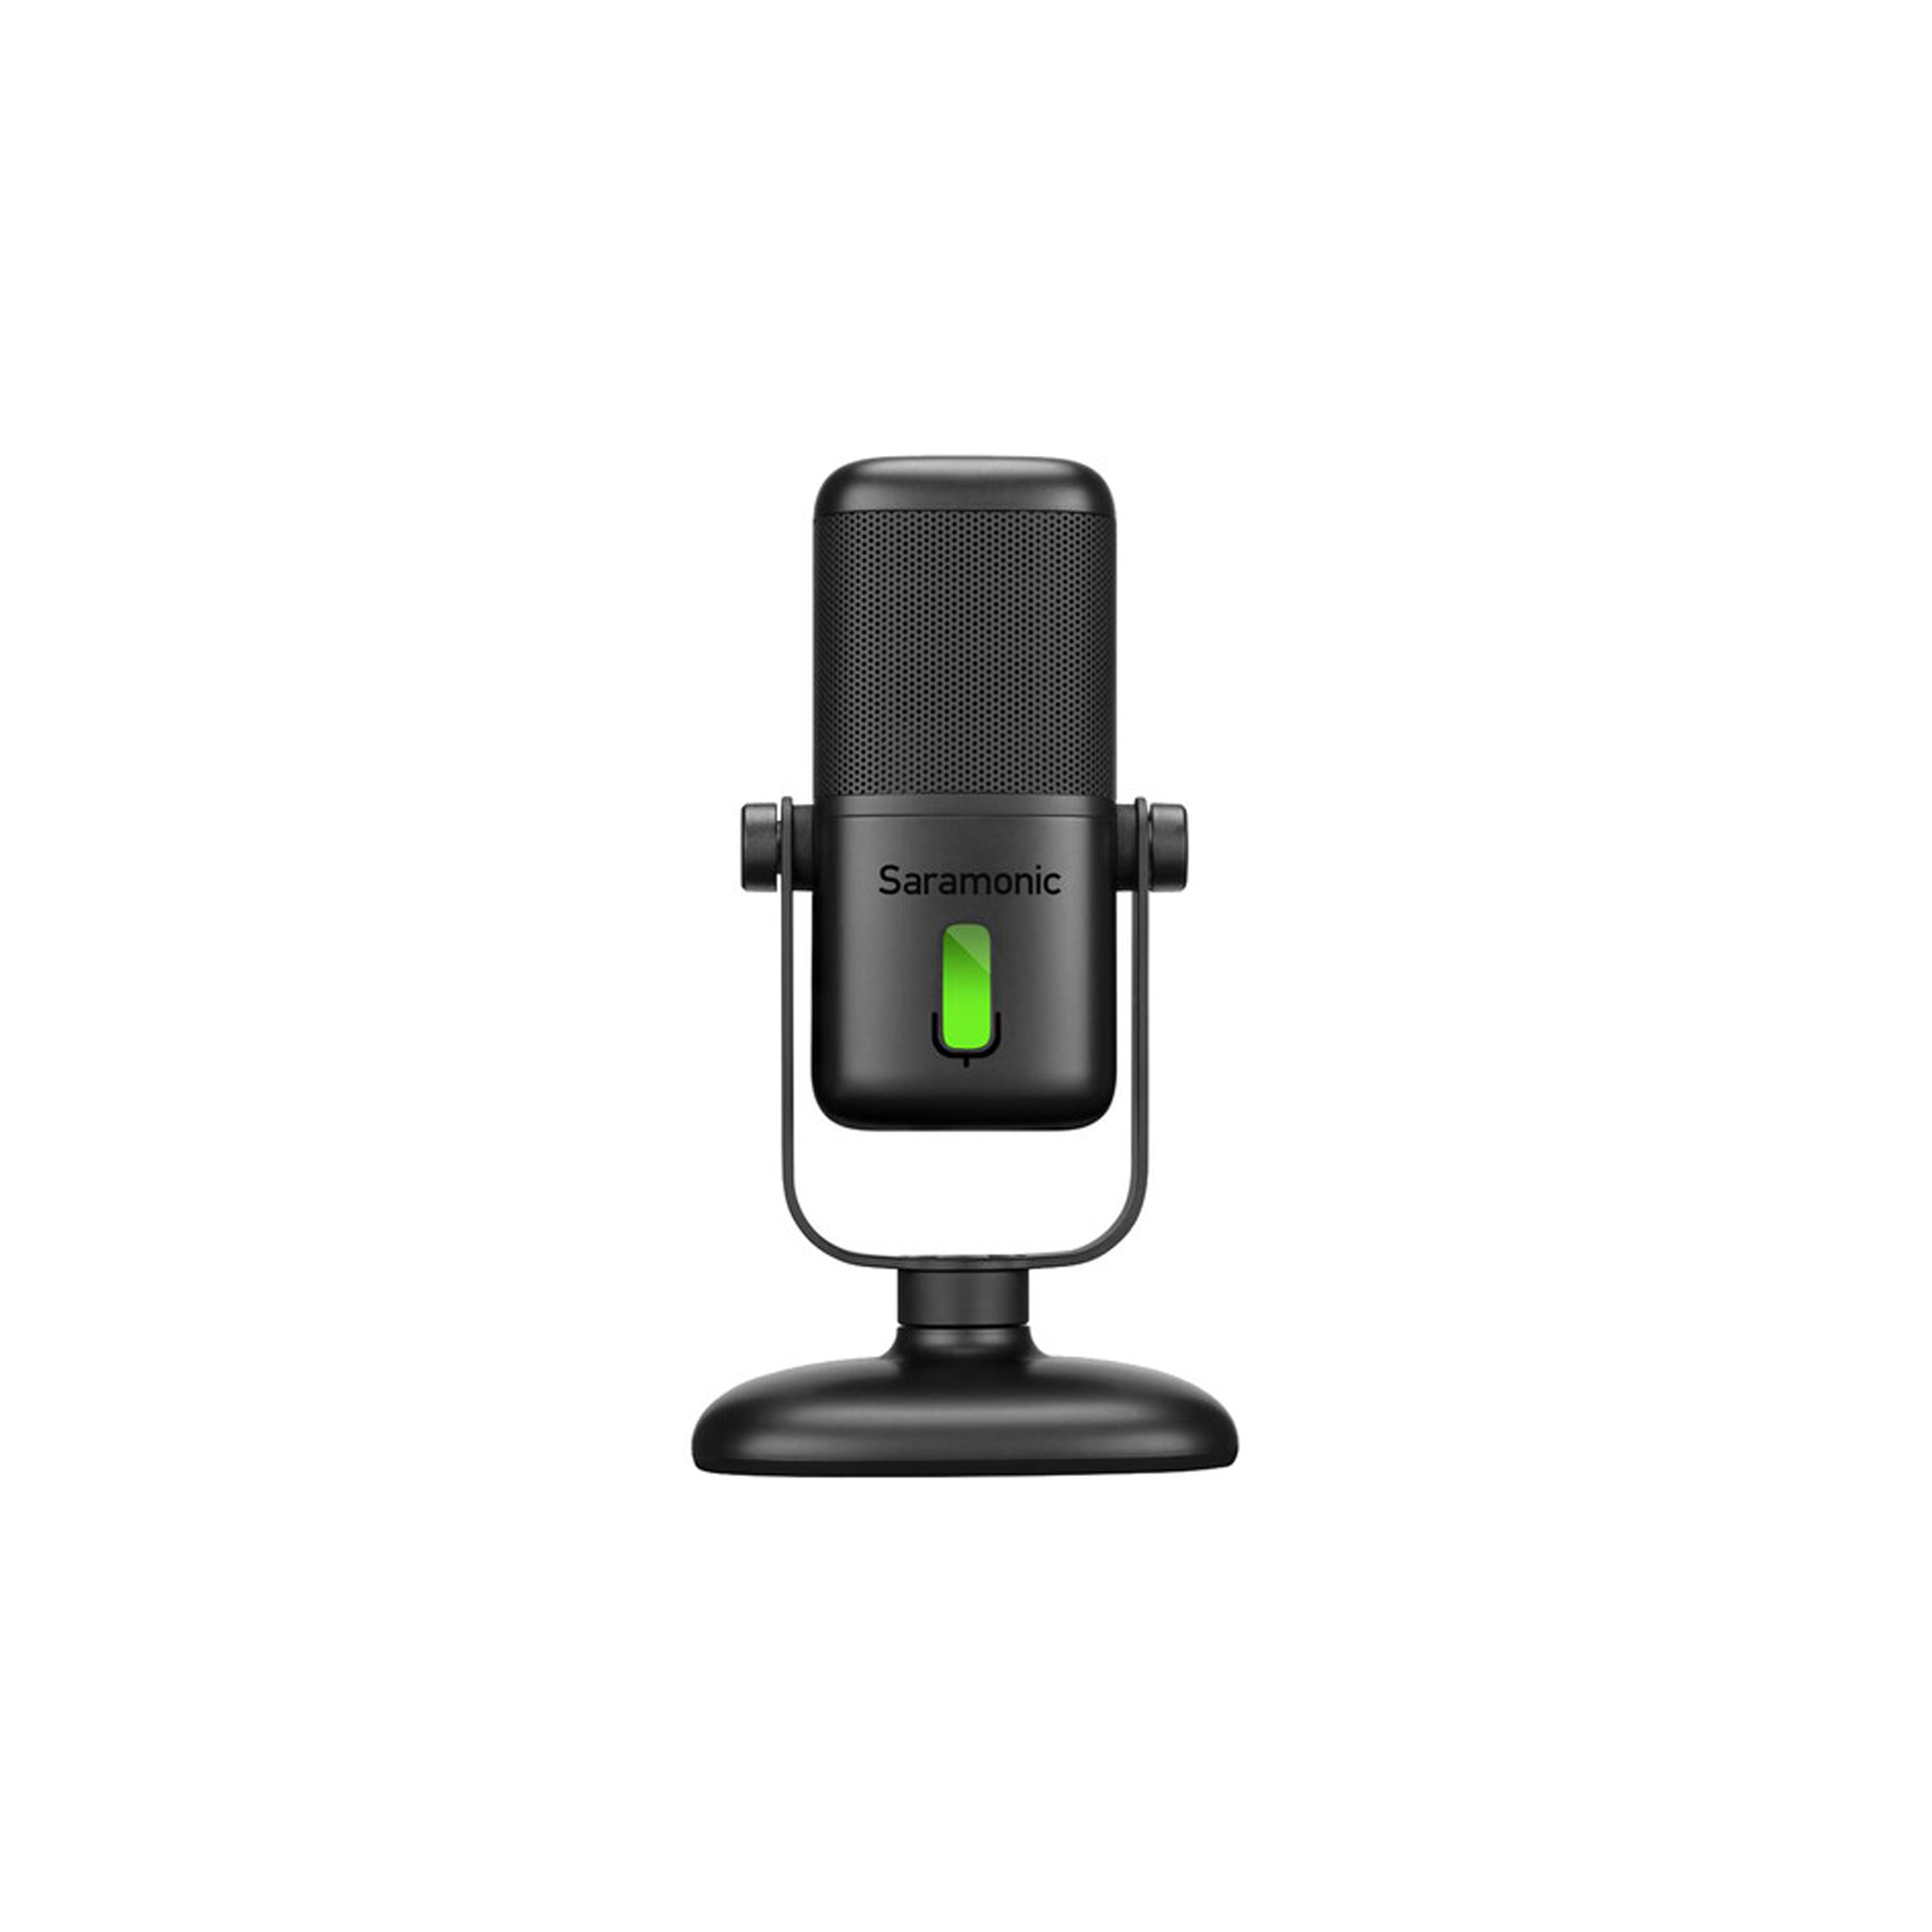 Saramonic SR-MV2000 Large-Diaphragm Cardioid USB Microphone for Computers and USB Type-C Mobile Devices